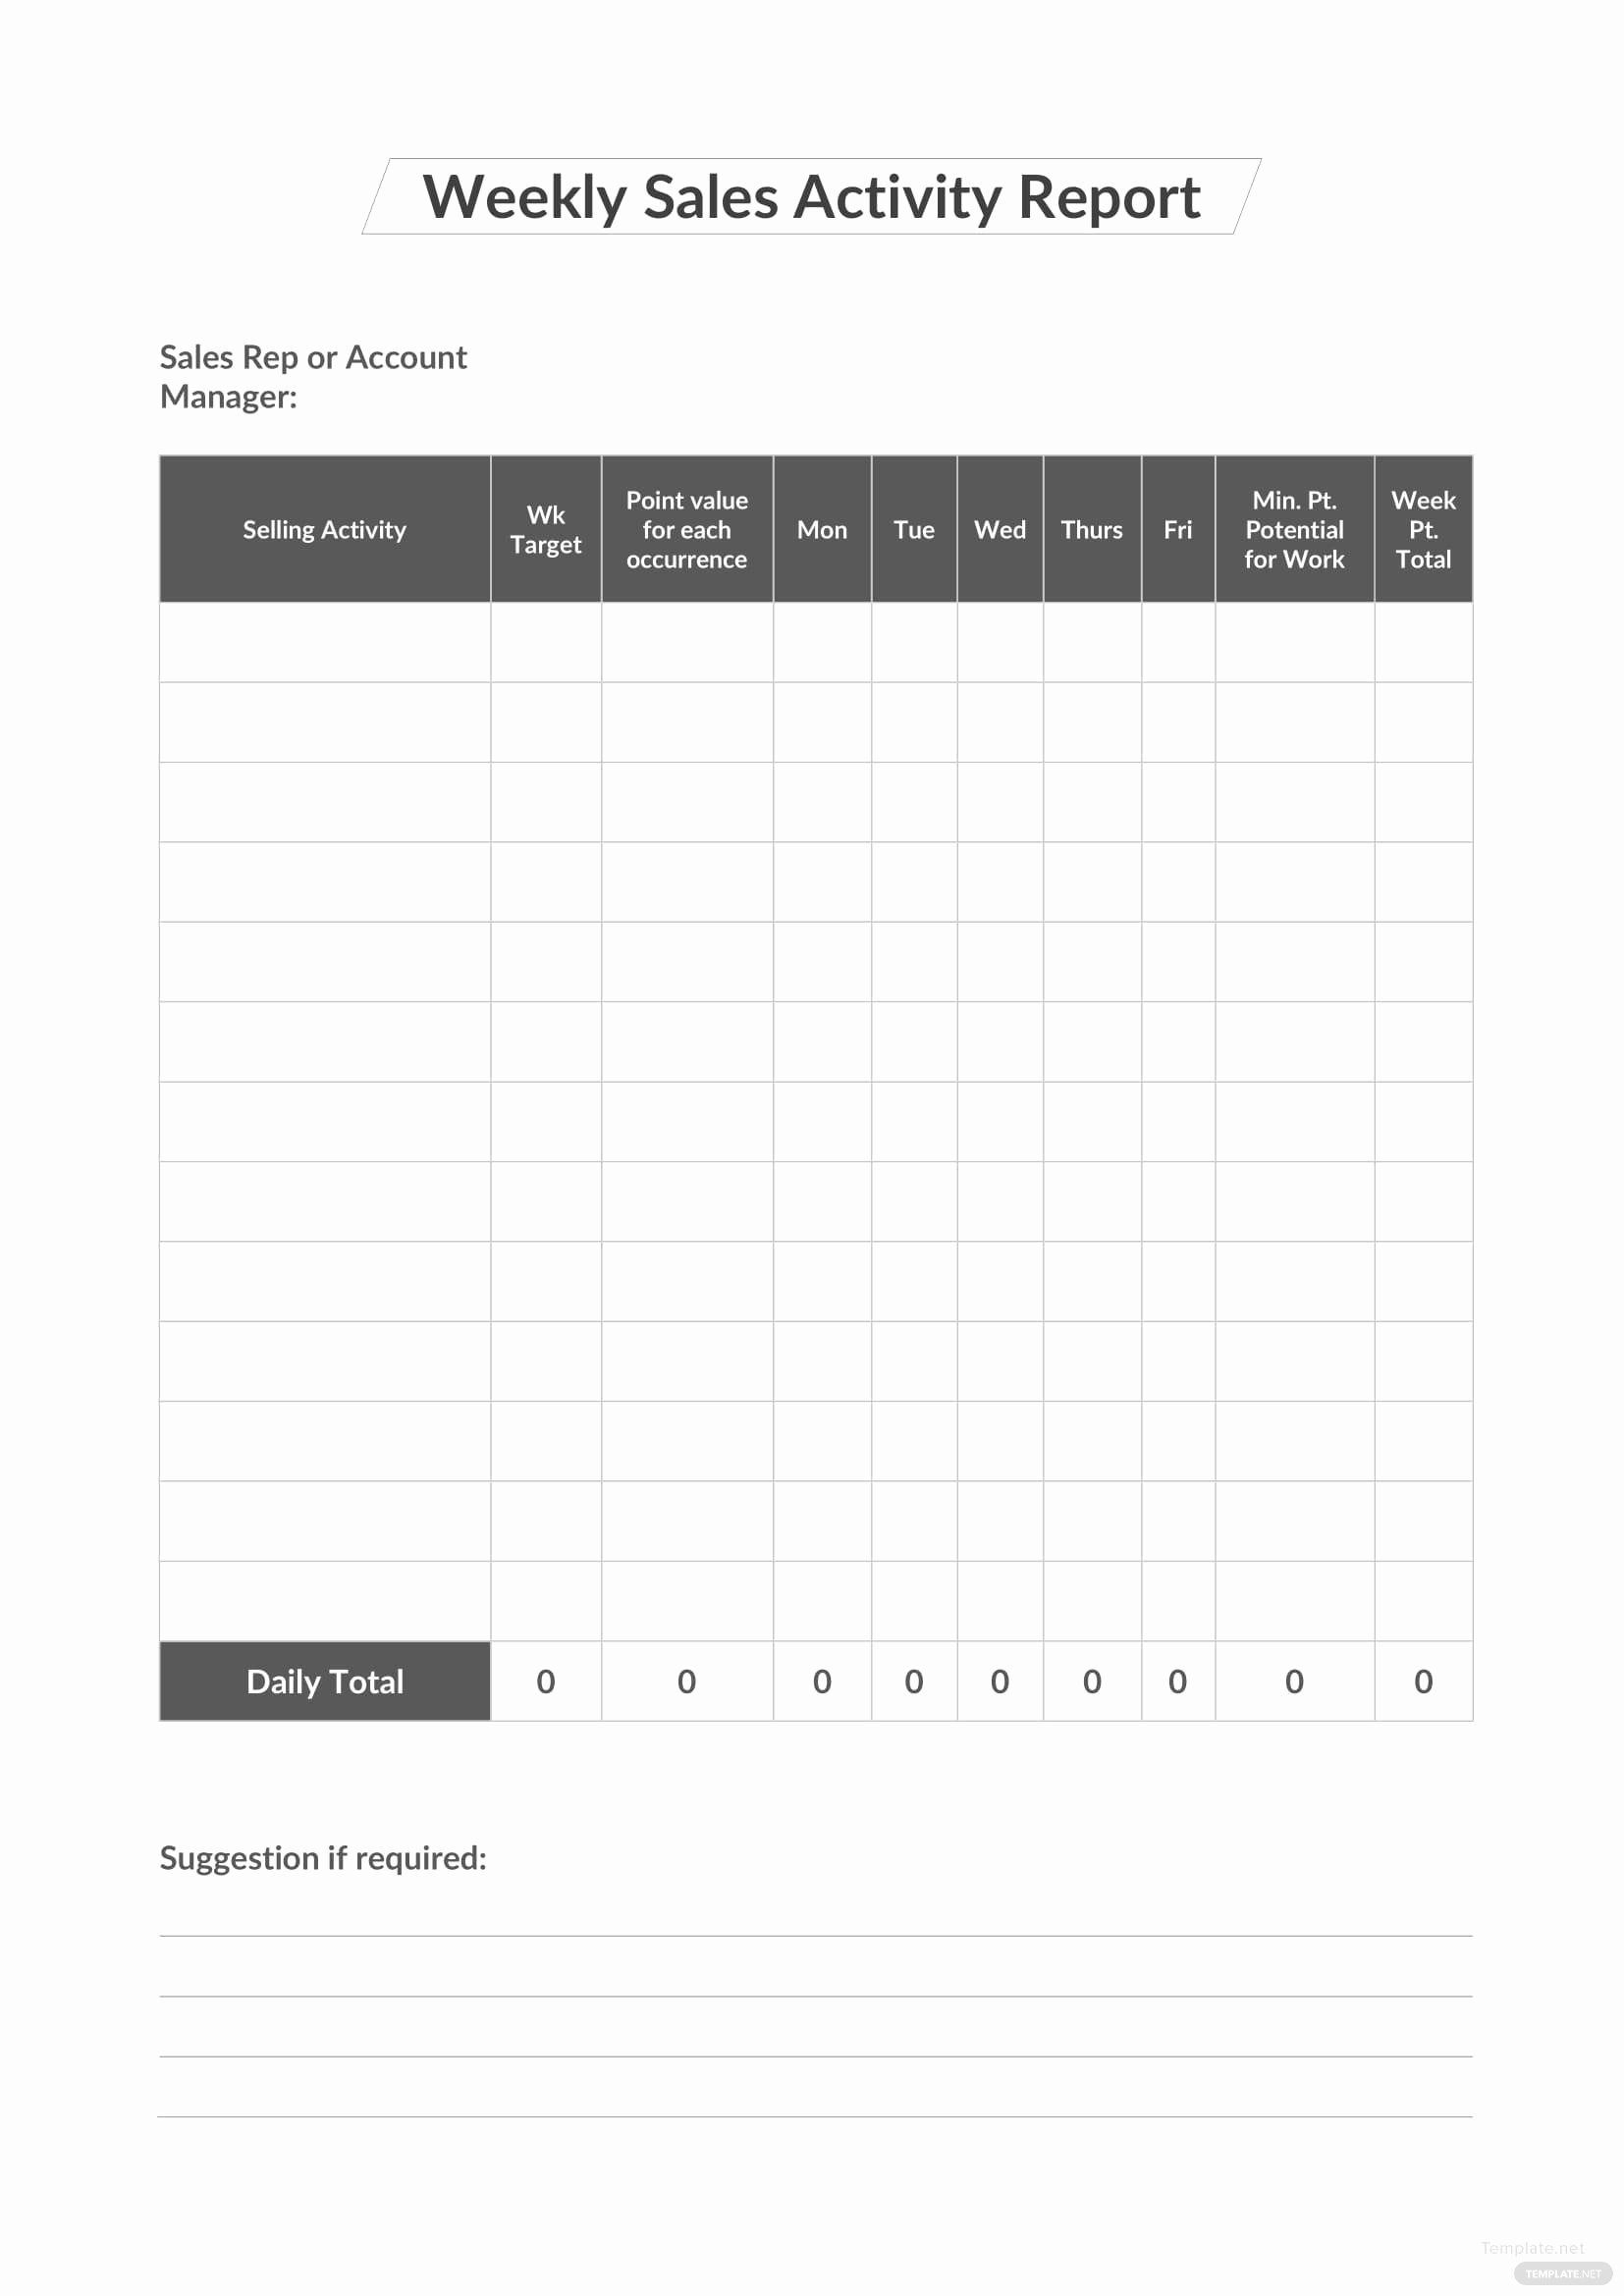 Weekly Sales Report Template New Weekly Sales Activity Report Template In Microsoft Word